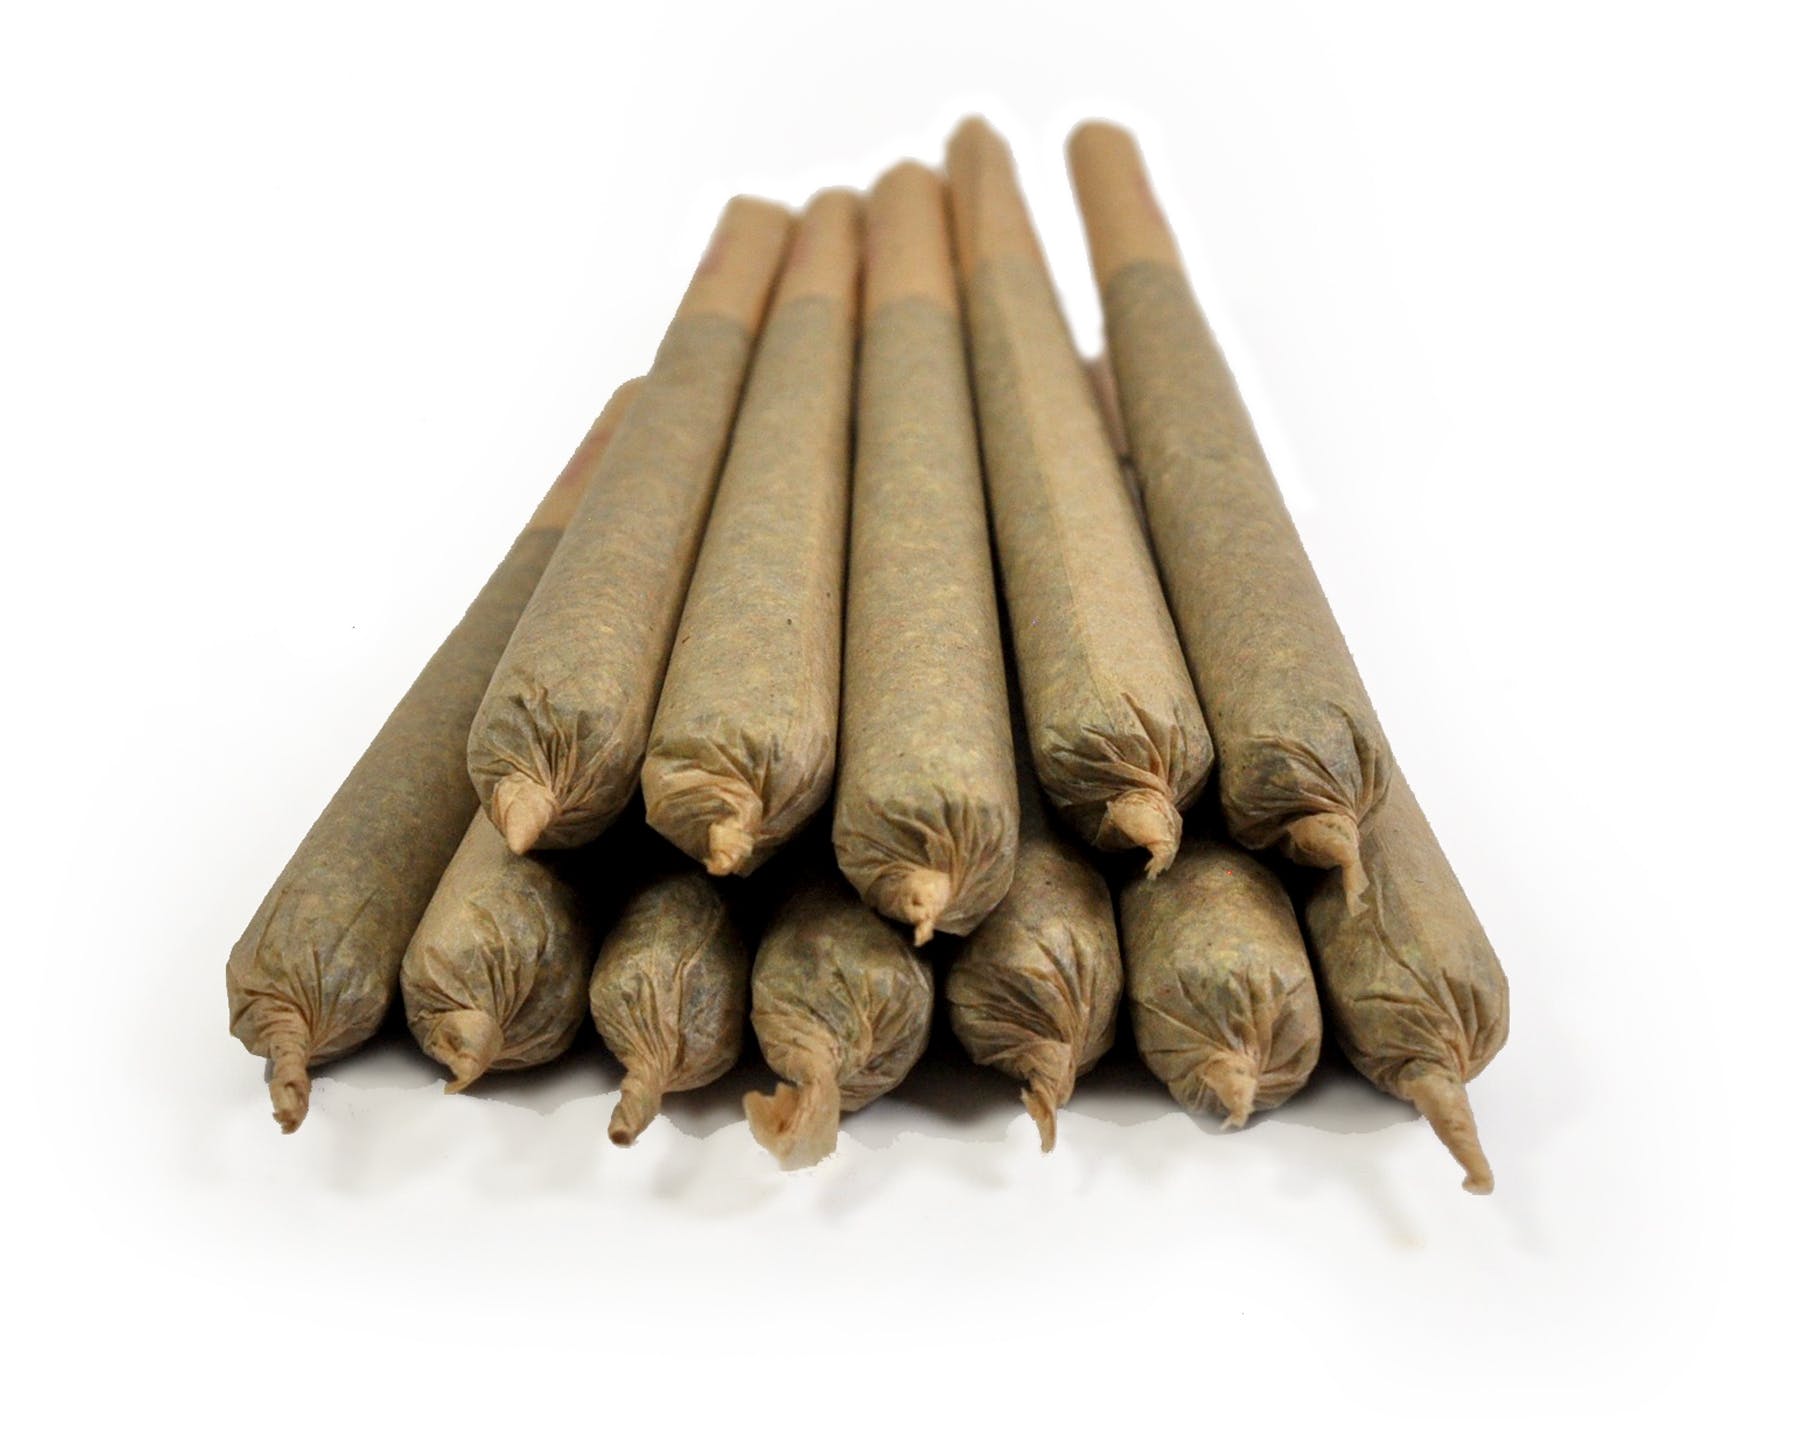 preroll-top-shelf-joints-sativa-5-for-20